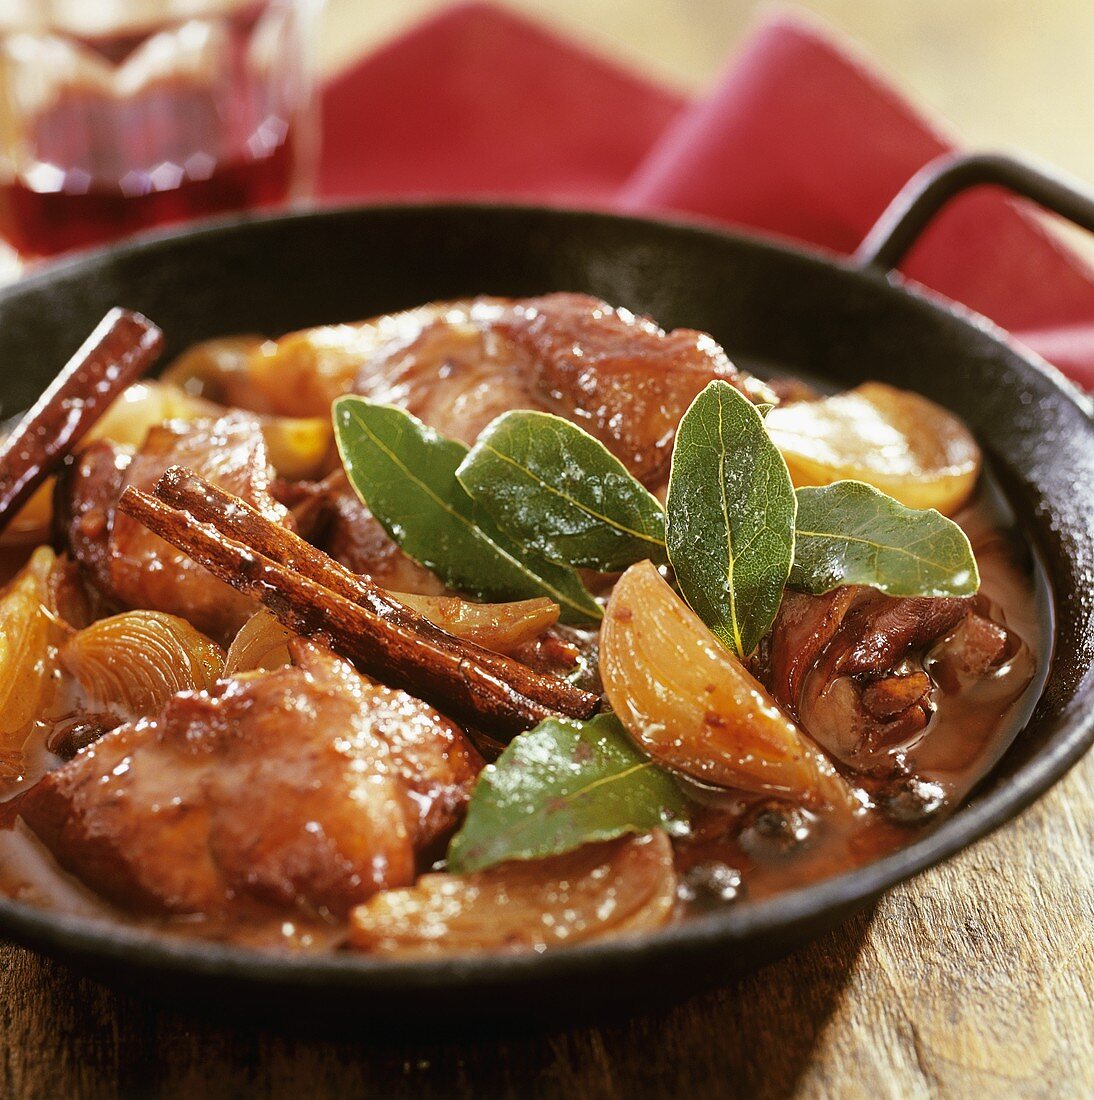 Pork stew with cinnamon and bay leaves